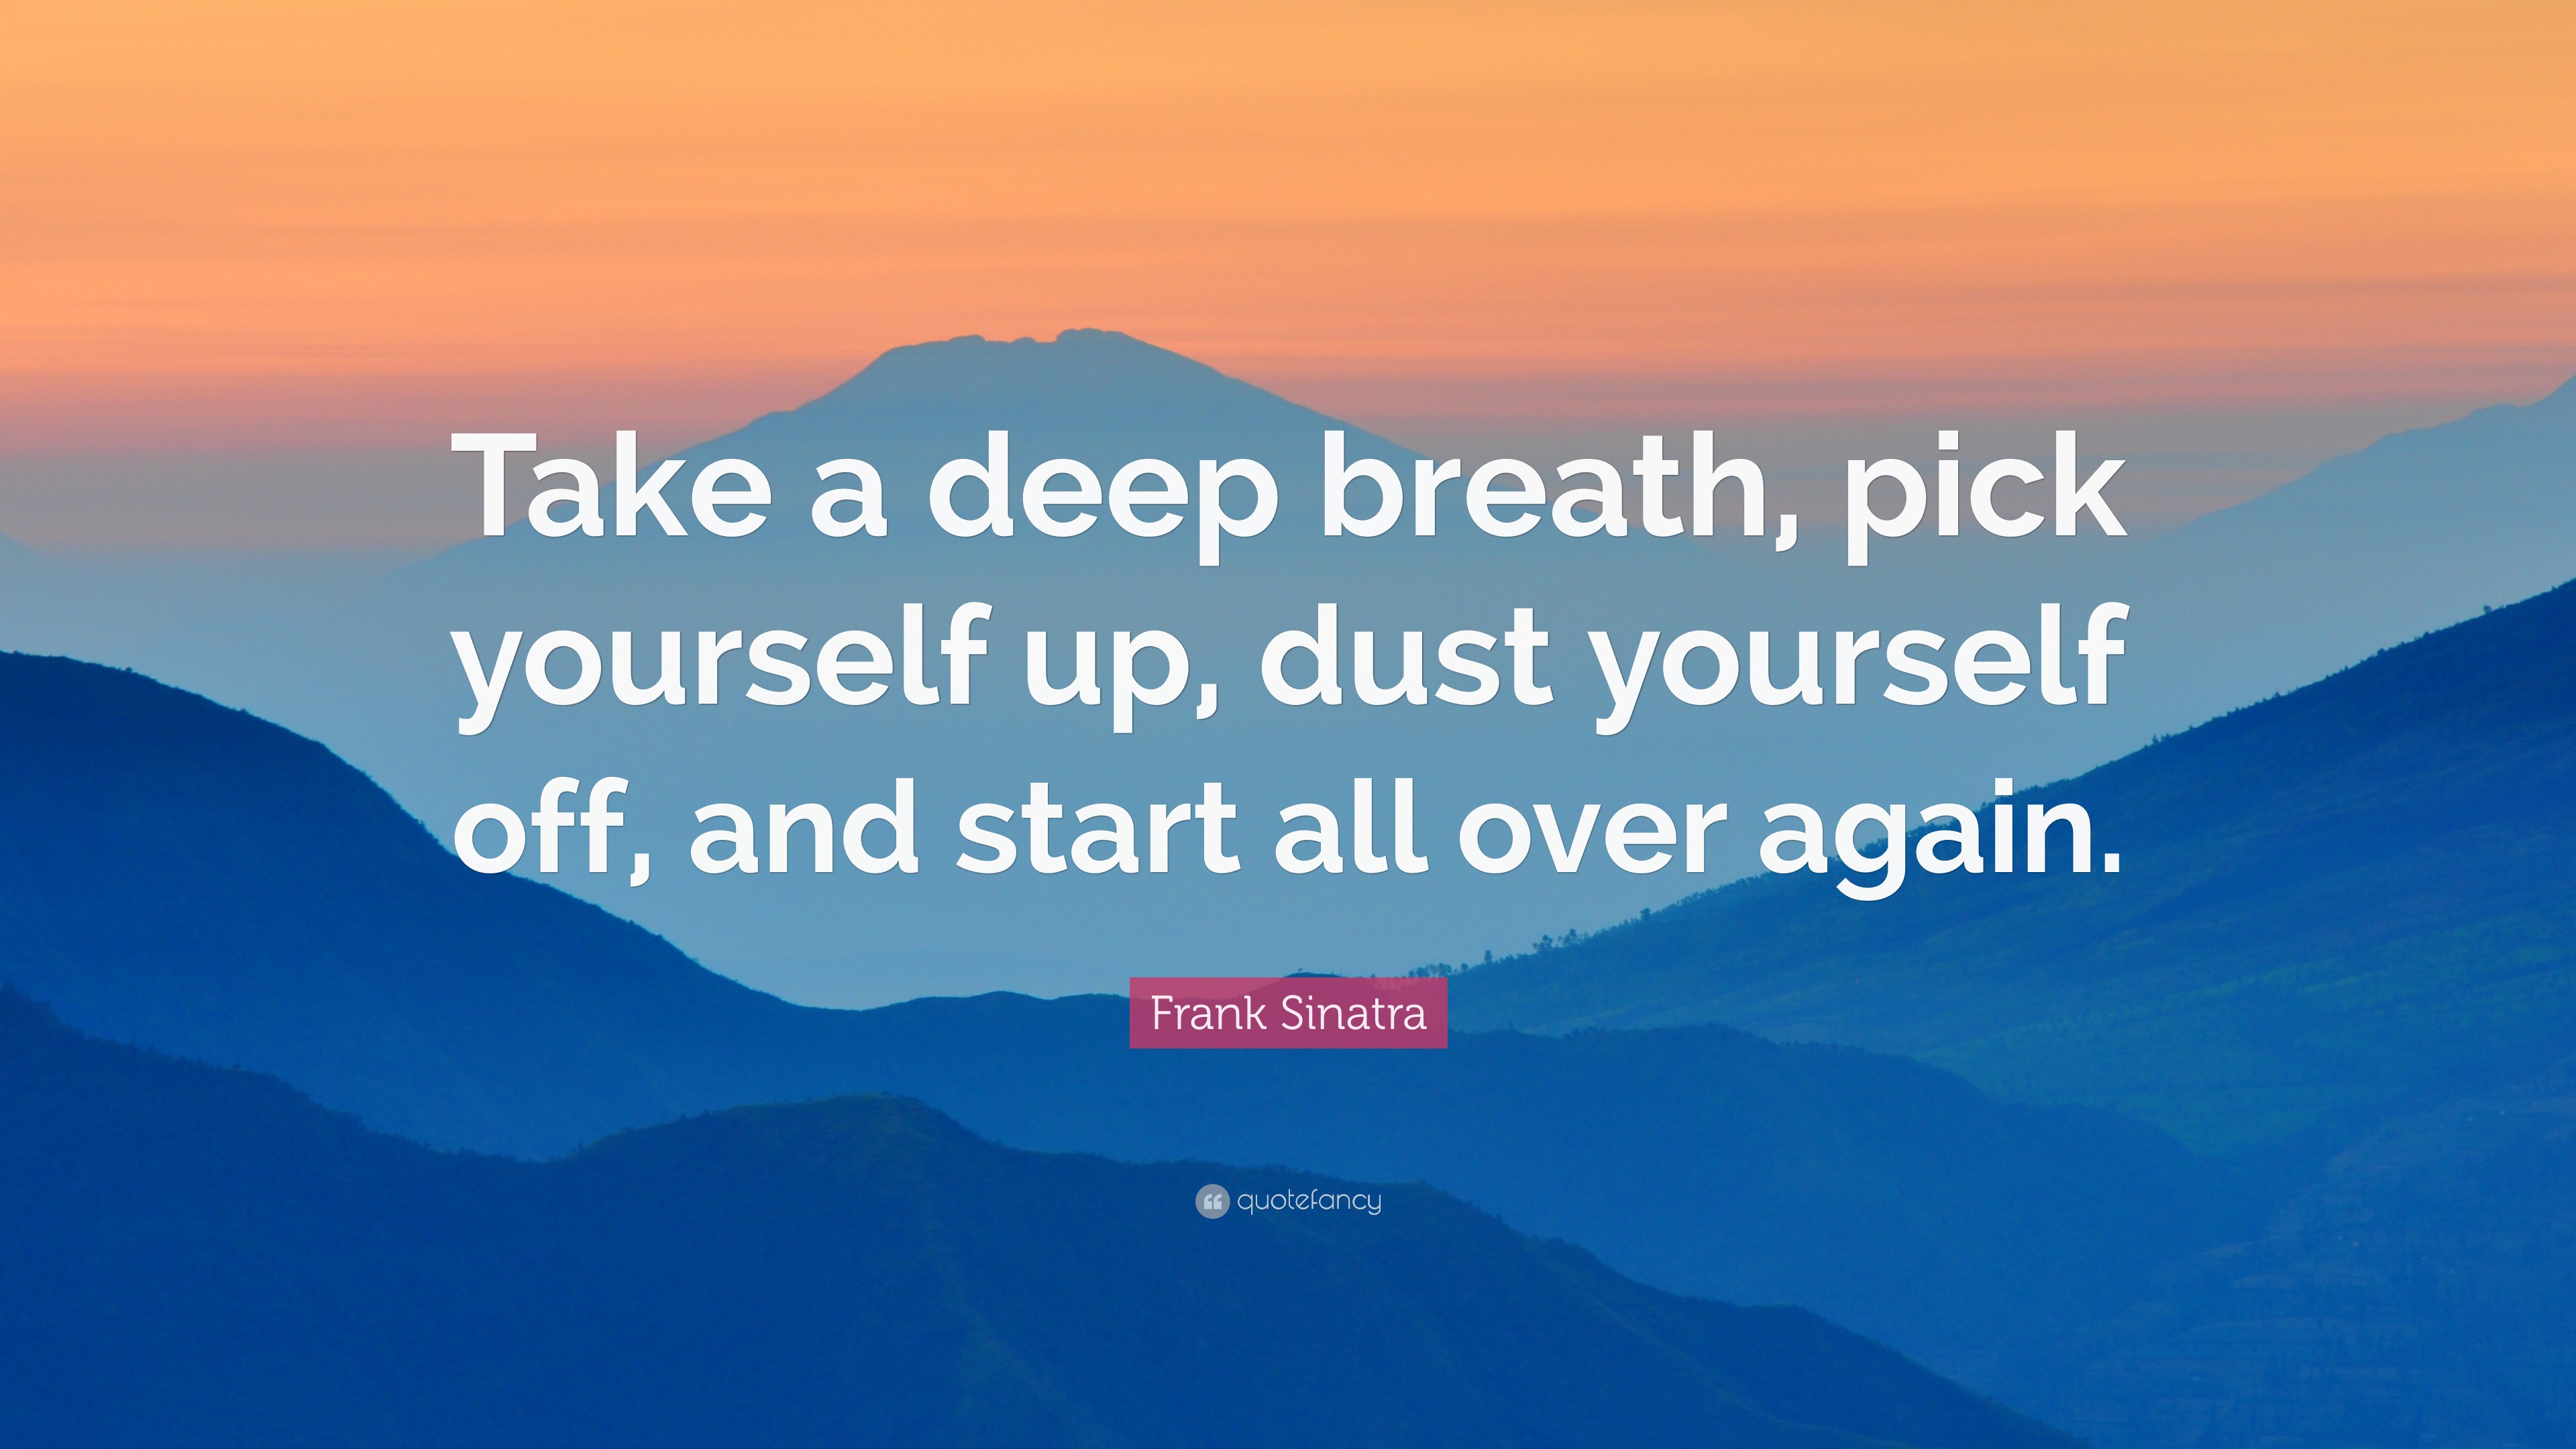 Frank Sinatra Quote: “Take a deep breath, pick yourself up, dust